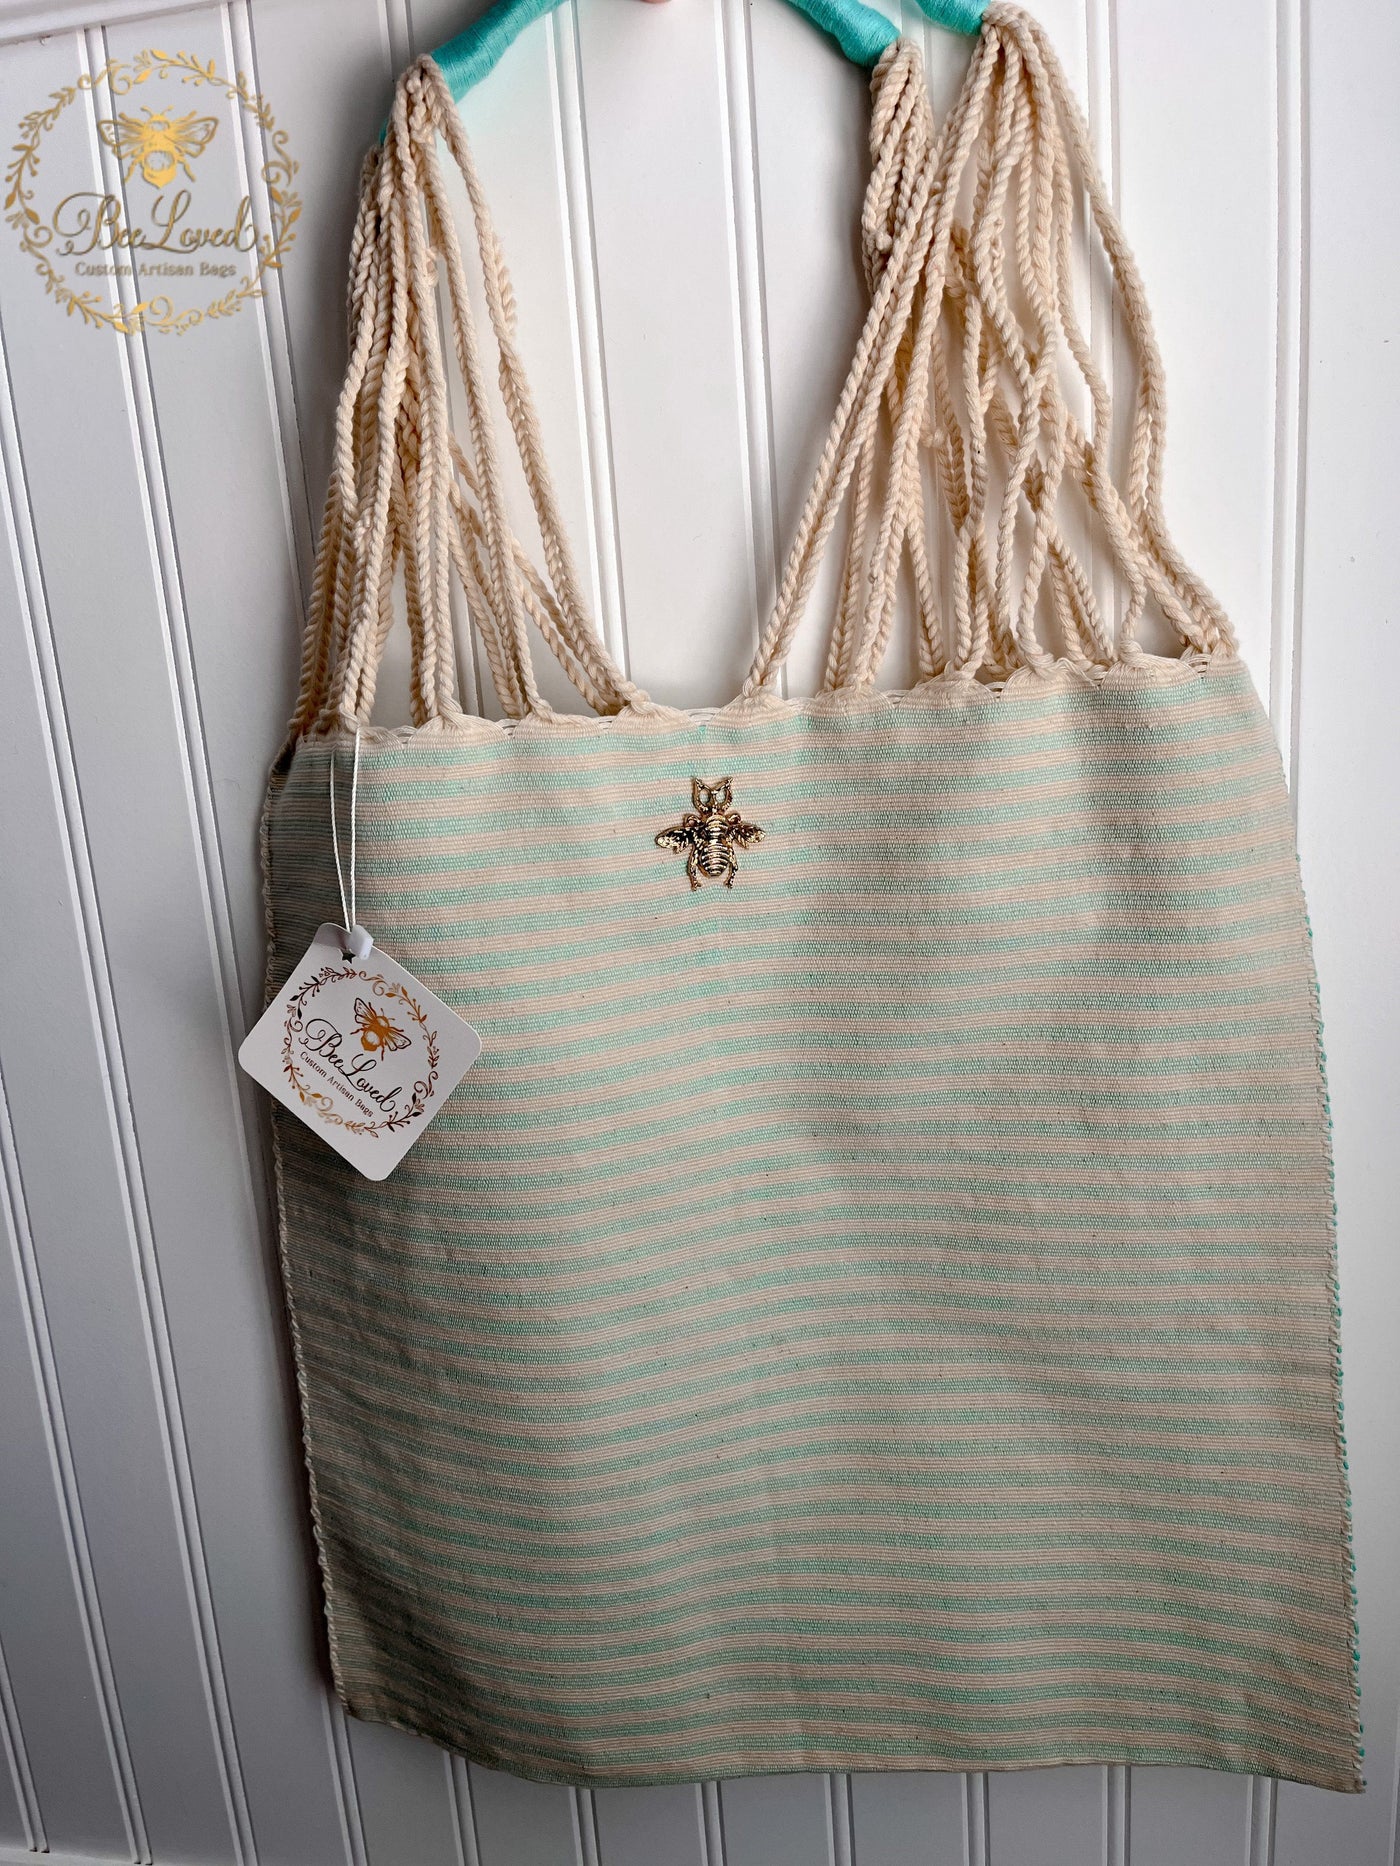 BeeLoved Custom Artisan Bags and Gifts Shades of Summer Fabric Tote Bag